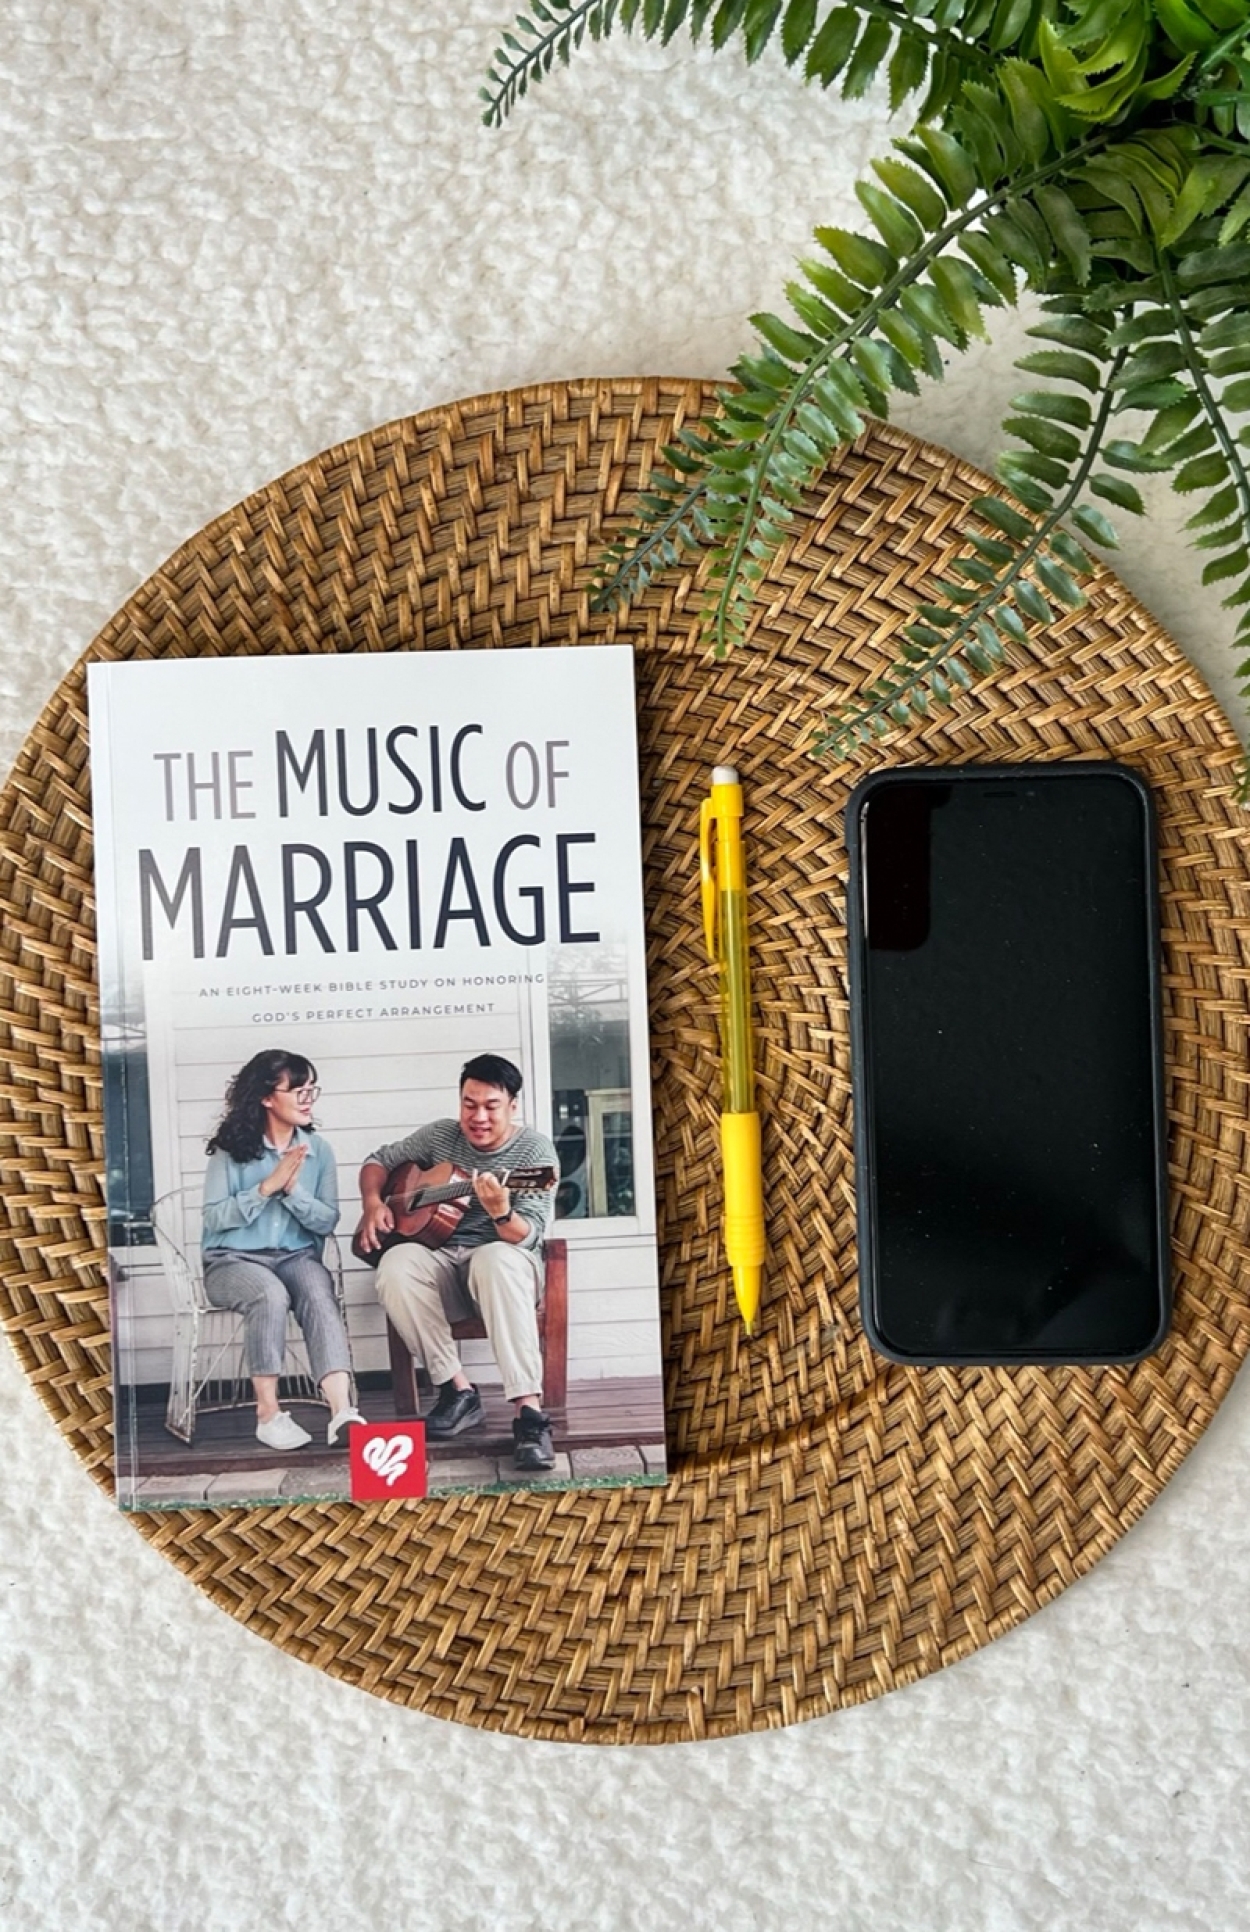 Bss133 the music of marriage bible study FLAT LAY